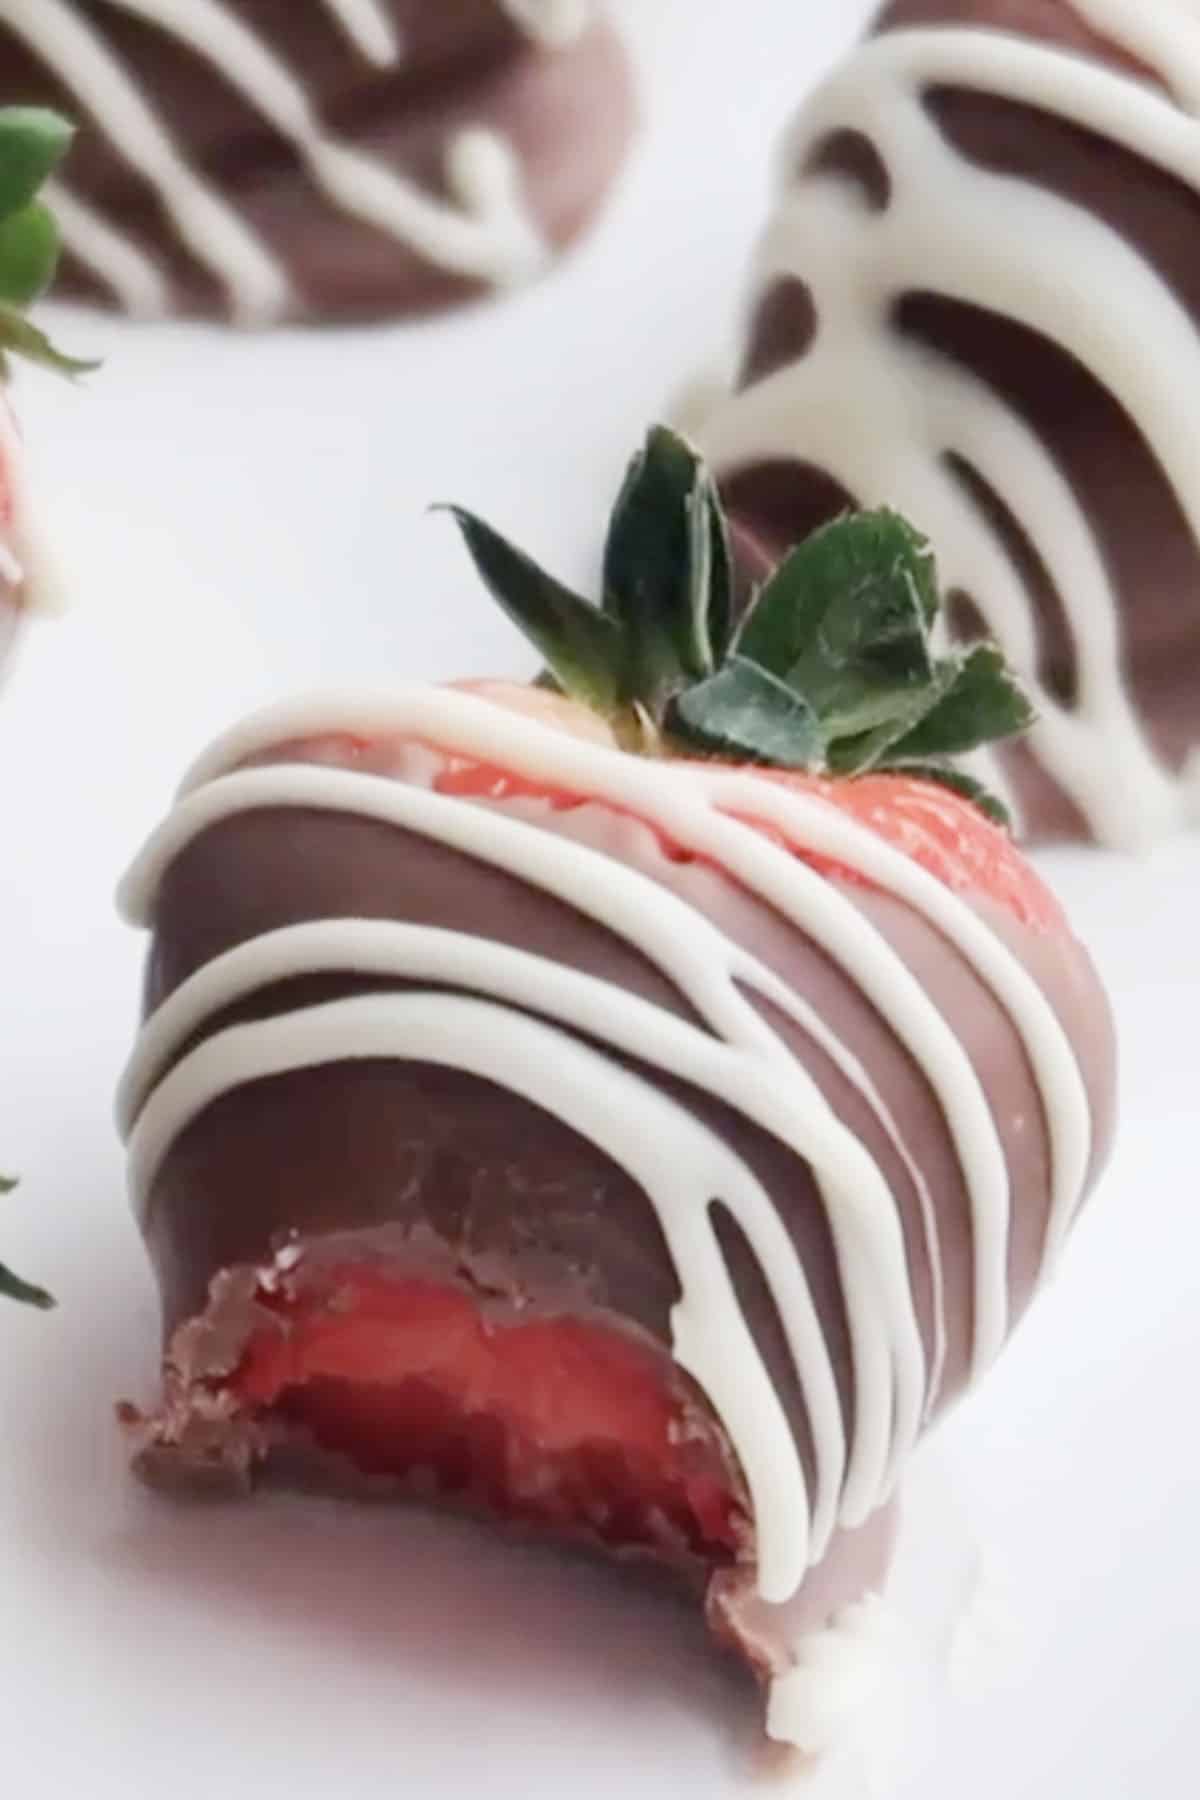 DIY chocolate dipped strawberry with a bite taken out, how to store chocolate covered strawberries, storing chocolate covered strawberries.  how to make chocolate dipped strawberries. chocolate strawberries. 